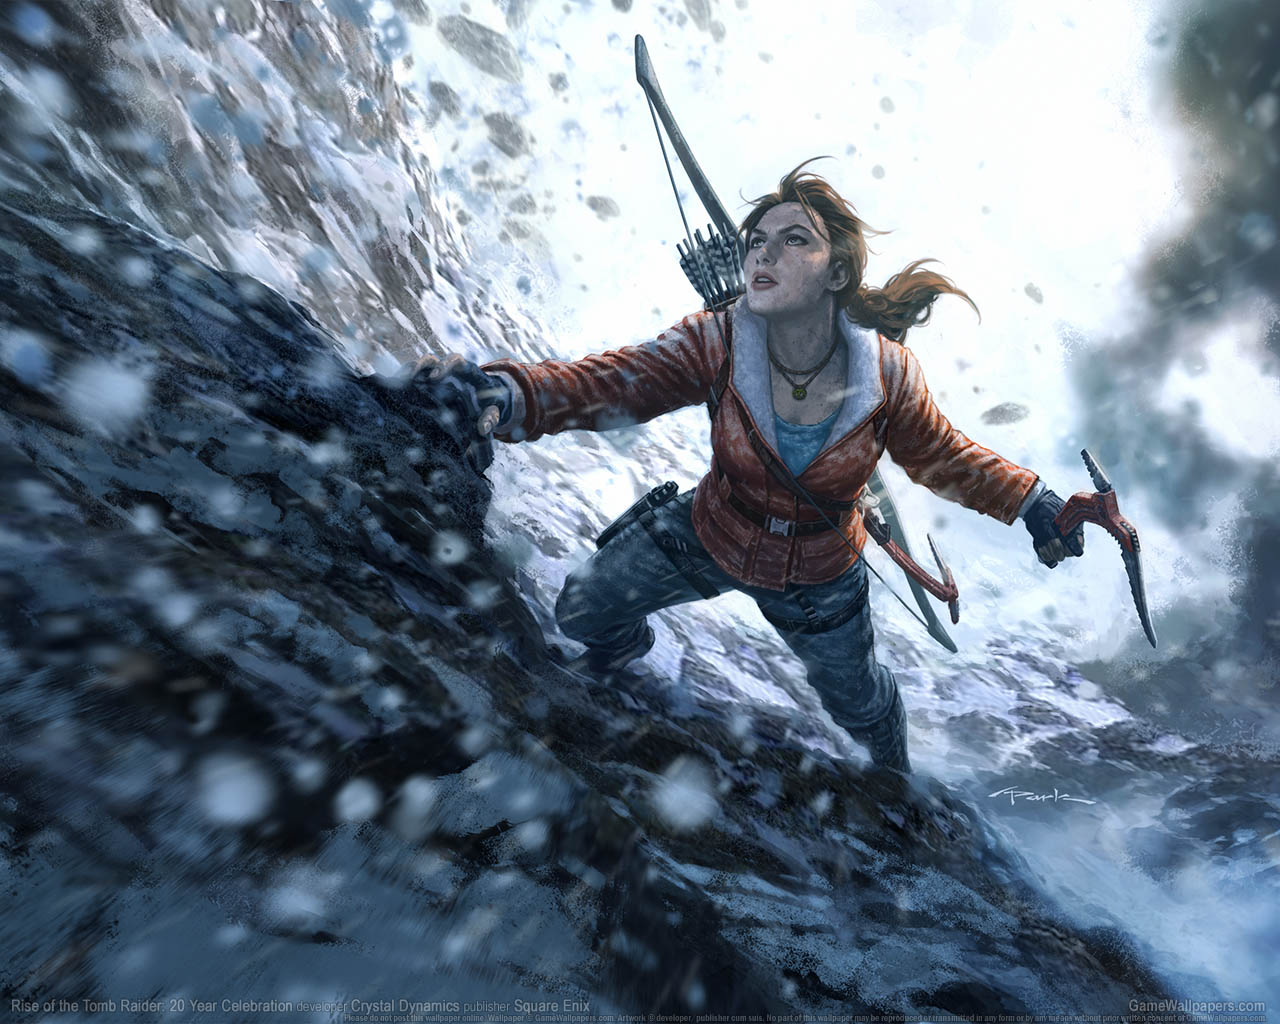 Rise of the Tomb Raider%253A 20 Year Celebration achtergrond 02 1280x1024